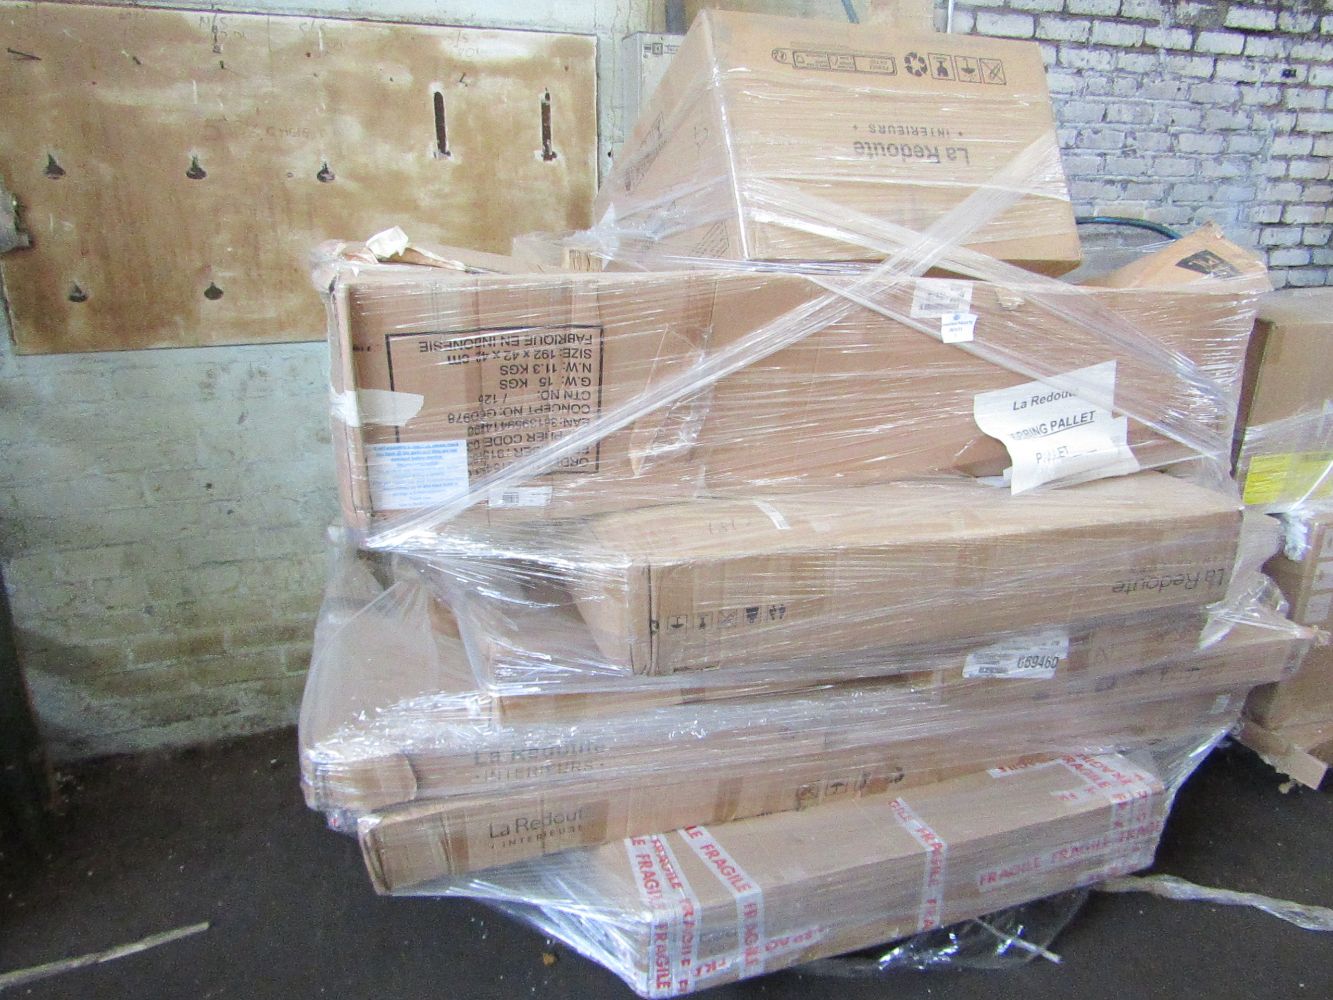 Pallets of Raw Unworked Customer returns from Made.com and La Redoute